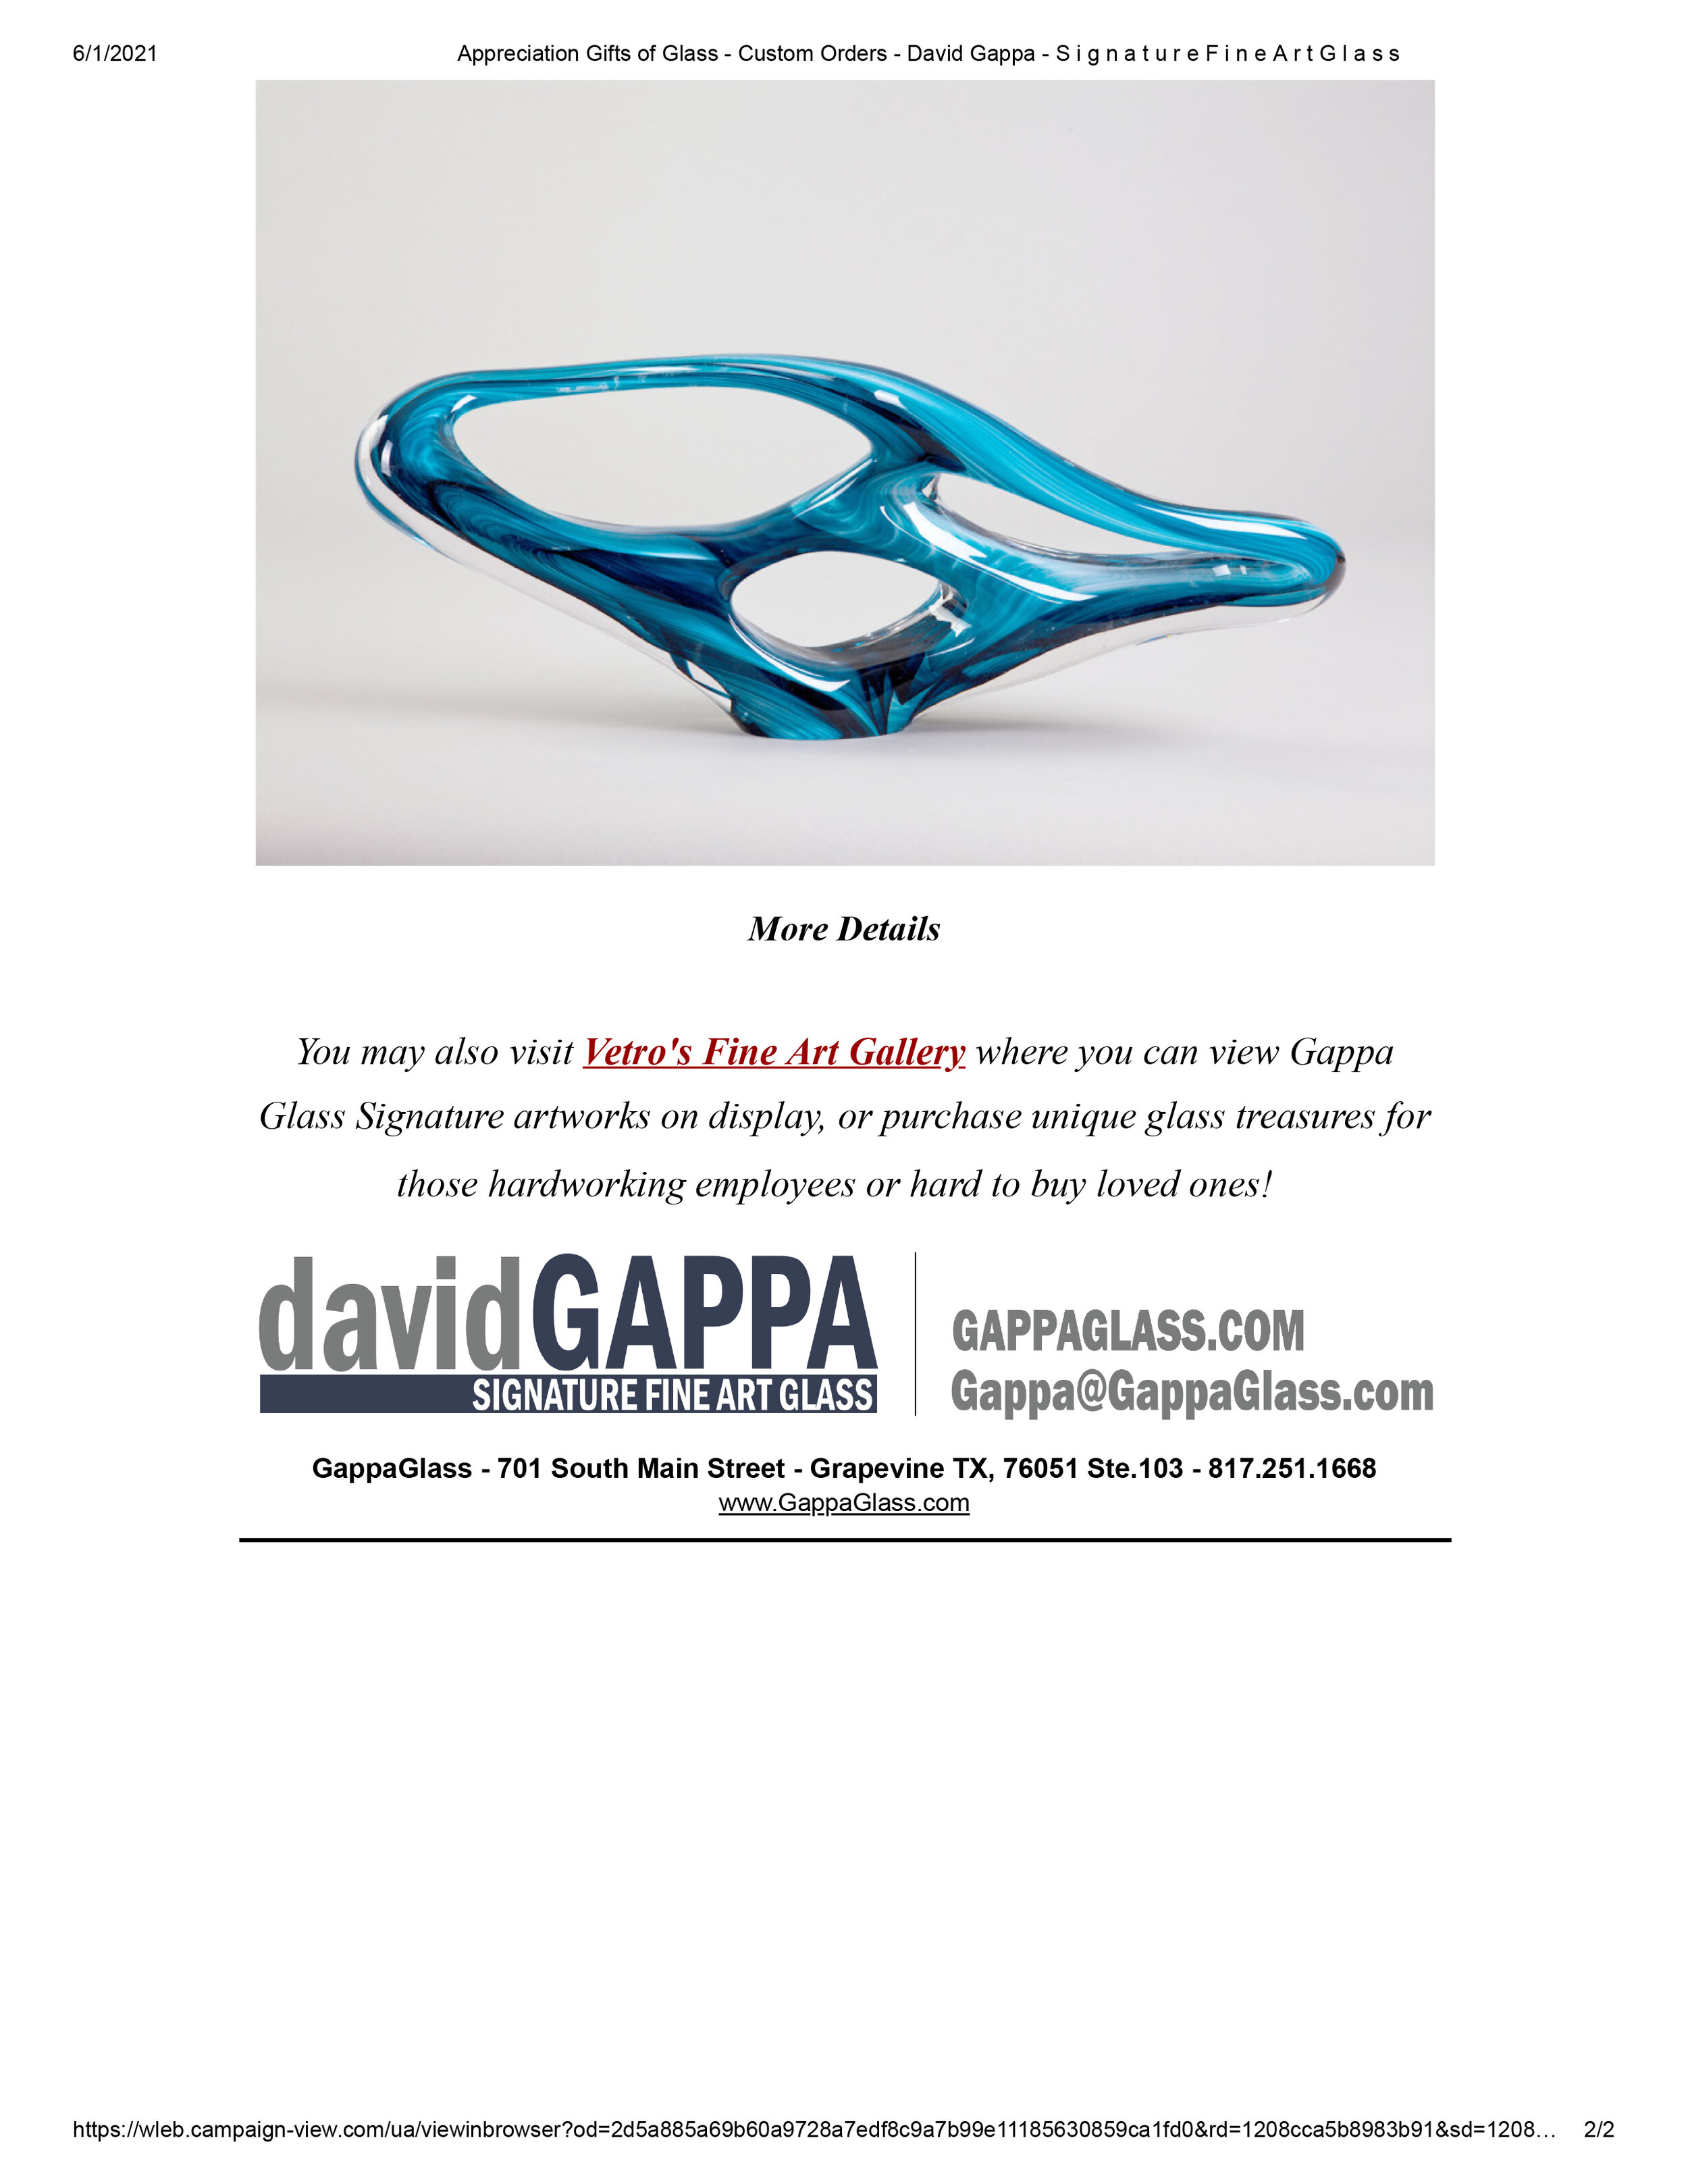 eMAIL cAMPAIGNS -Appreciation Gifts of Glass - Custom Orders - David Gappa - S i g n a t u r e F i n e A r t G l a s s-2.jpg